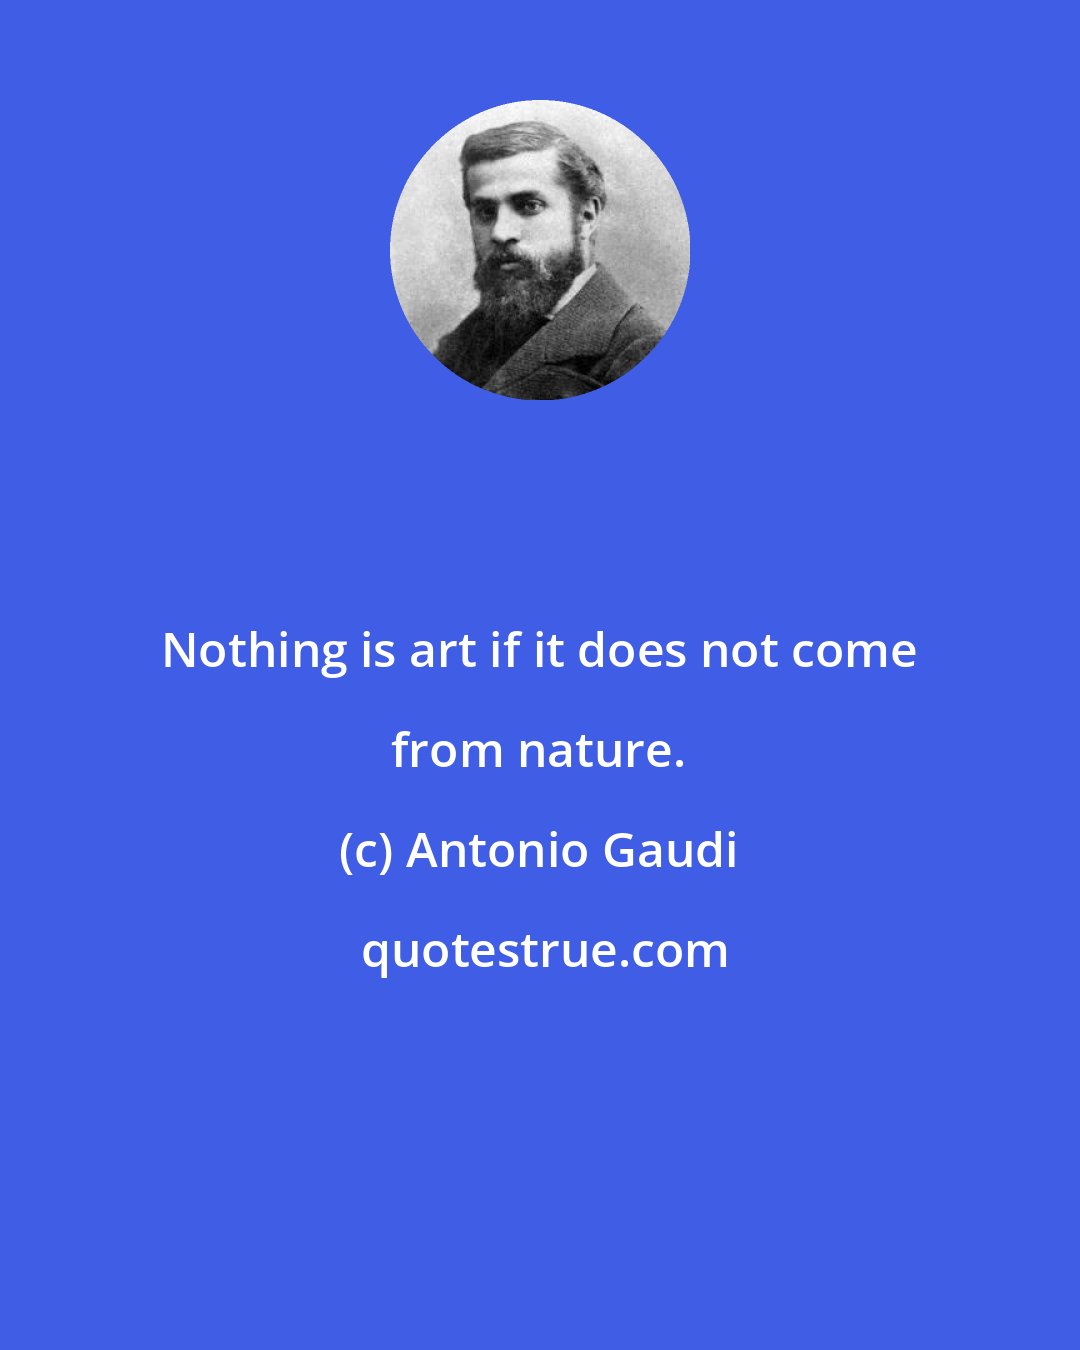 Antonio Gaudi: Nothing is art if it does not come from nature.